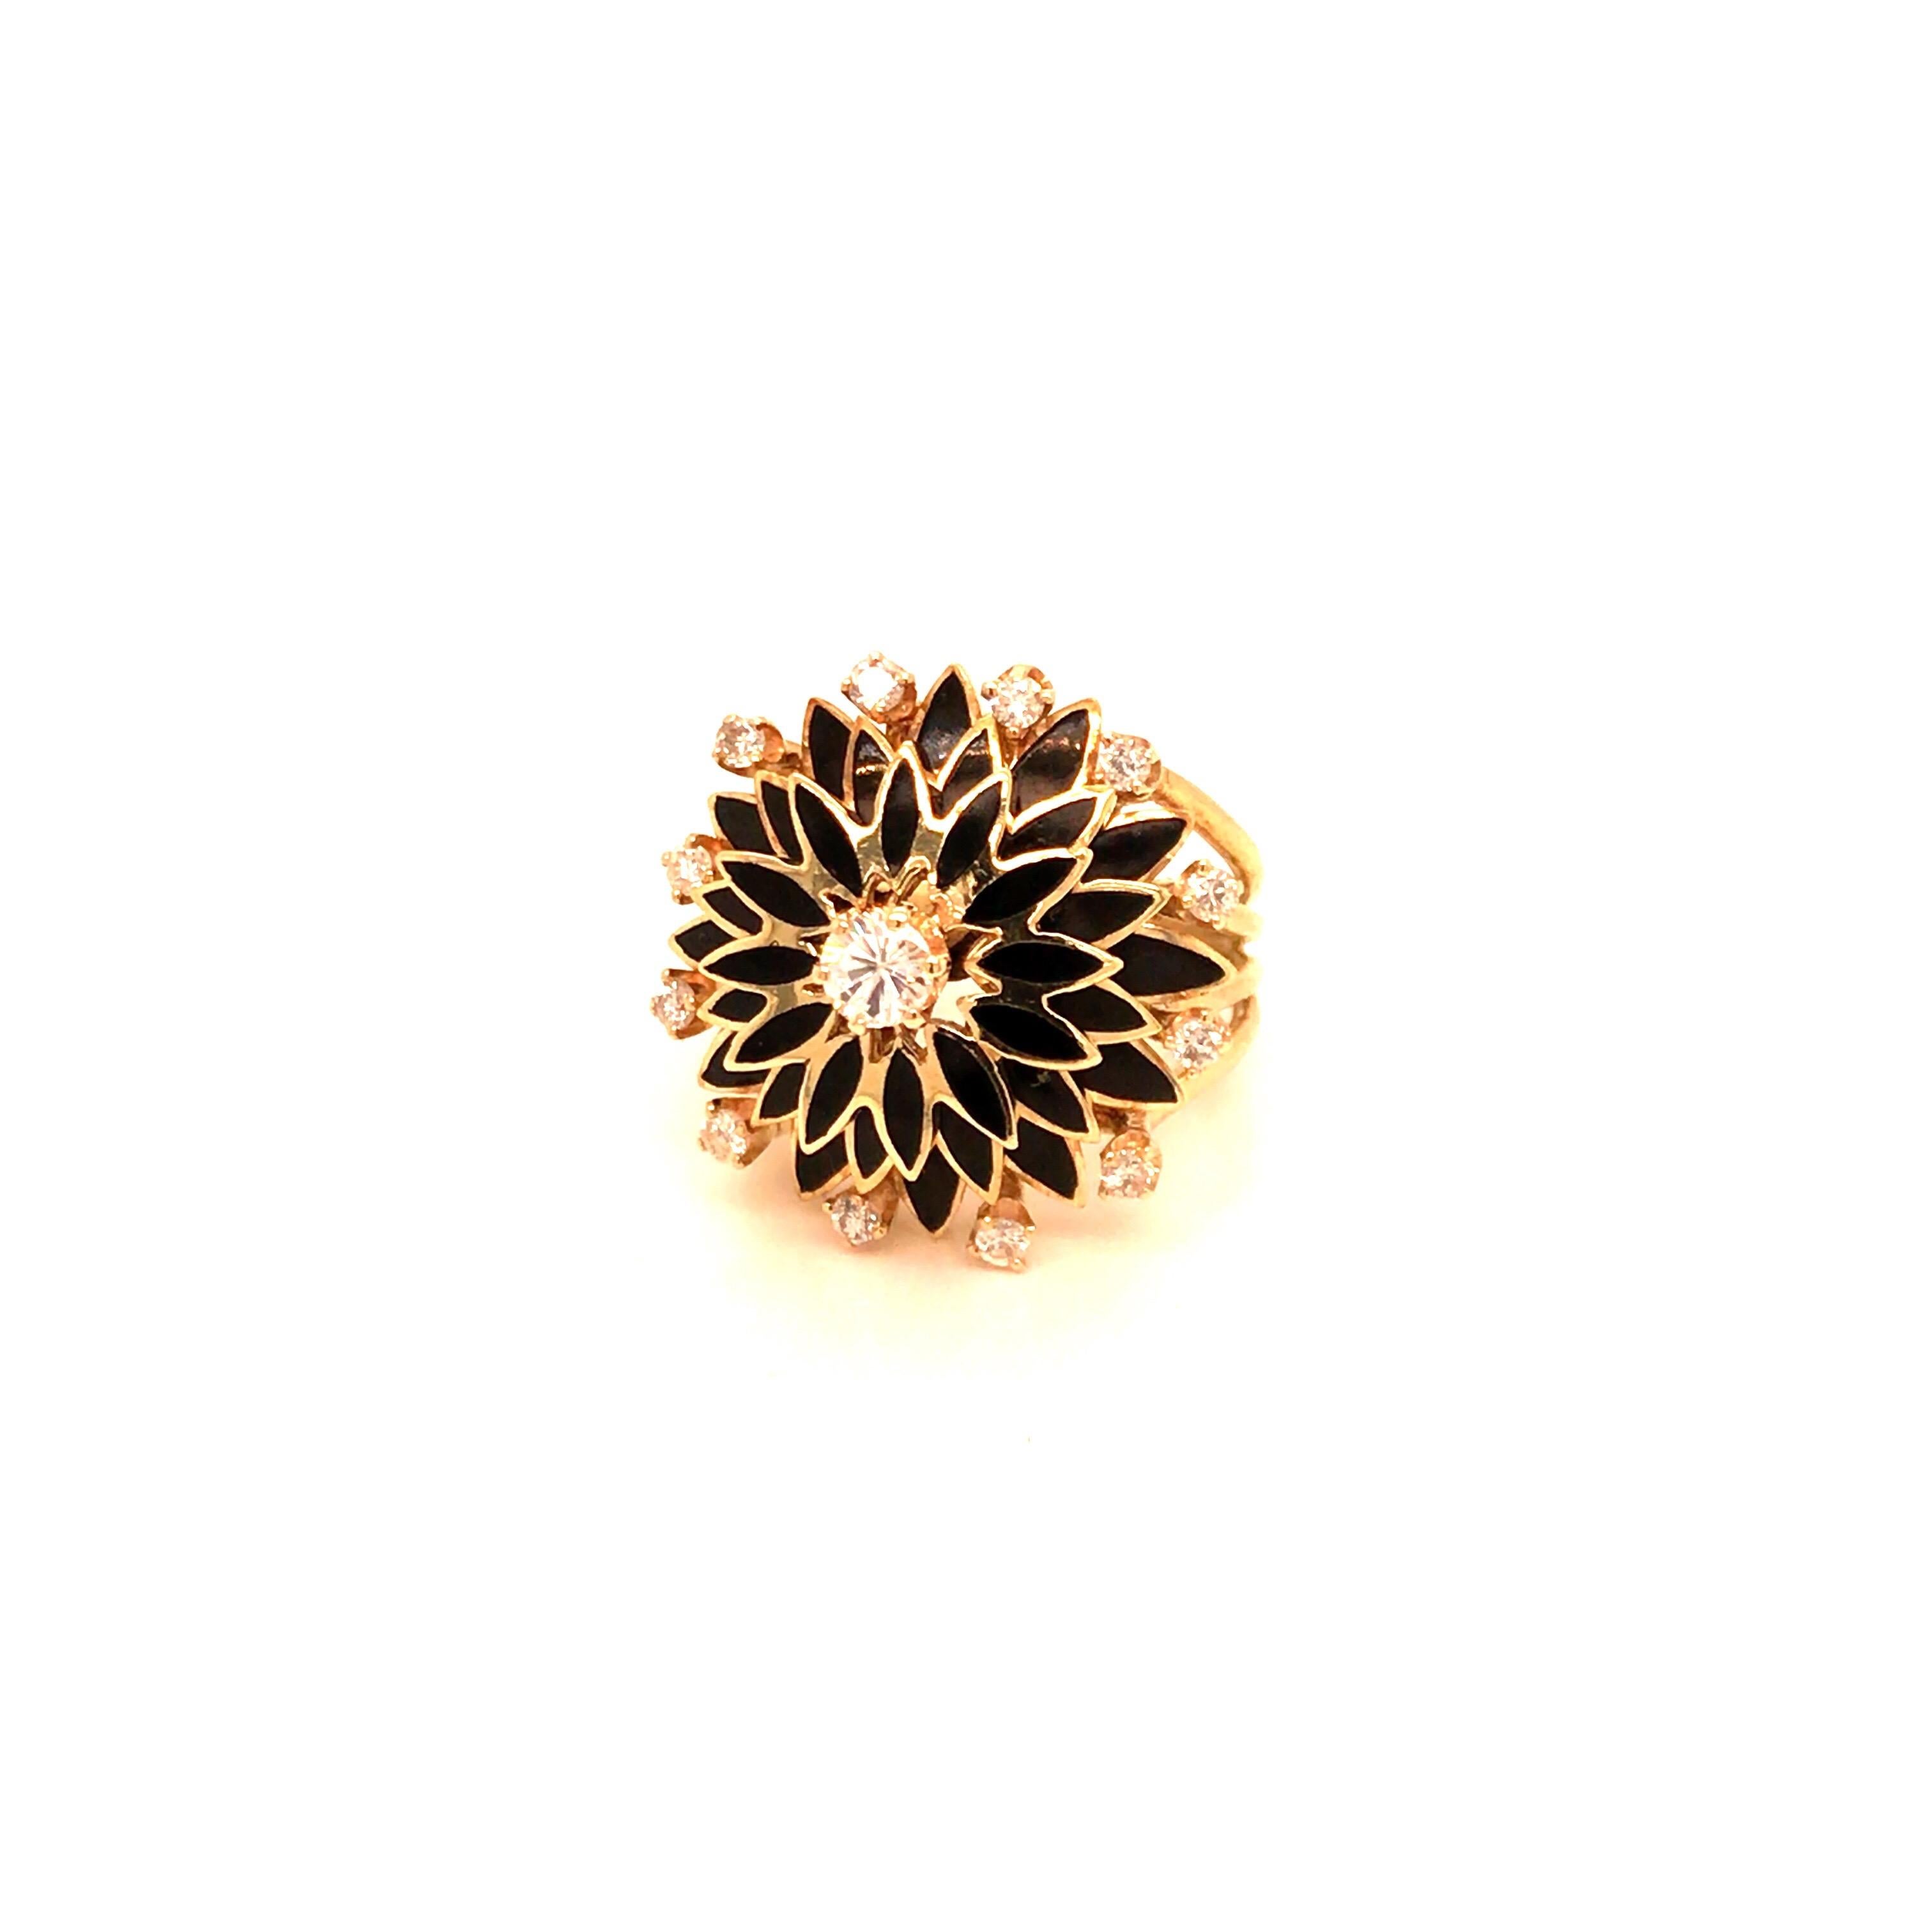 Vintage 1960's 14kt yellow gold diamond and black enameled ring with a center round diamond weighing approximately .23ct (I color, SI2 clarity) with a surrounding of 3 levels of 12 black enameled marquise shaped sections in each level with a